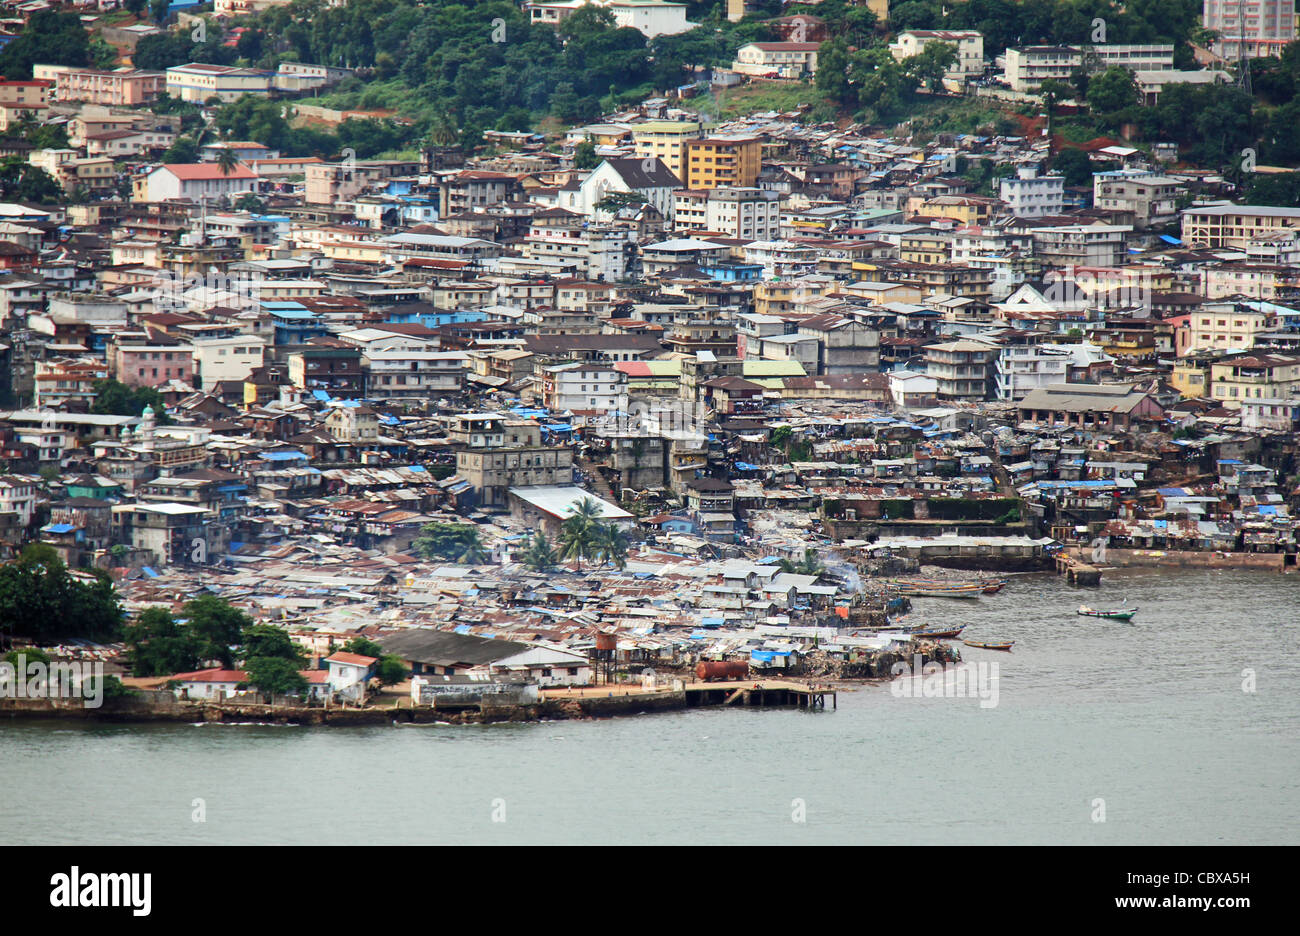 Aerial view of Freetown, Sierra Leone, with coastal slum areas in the foreground. Stock Photo